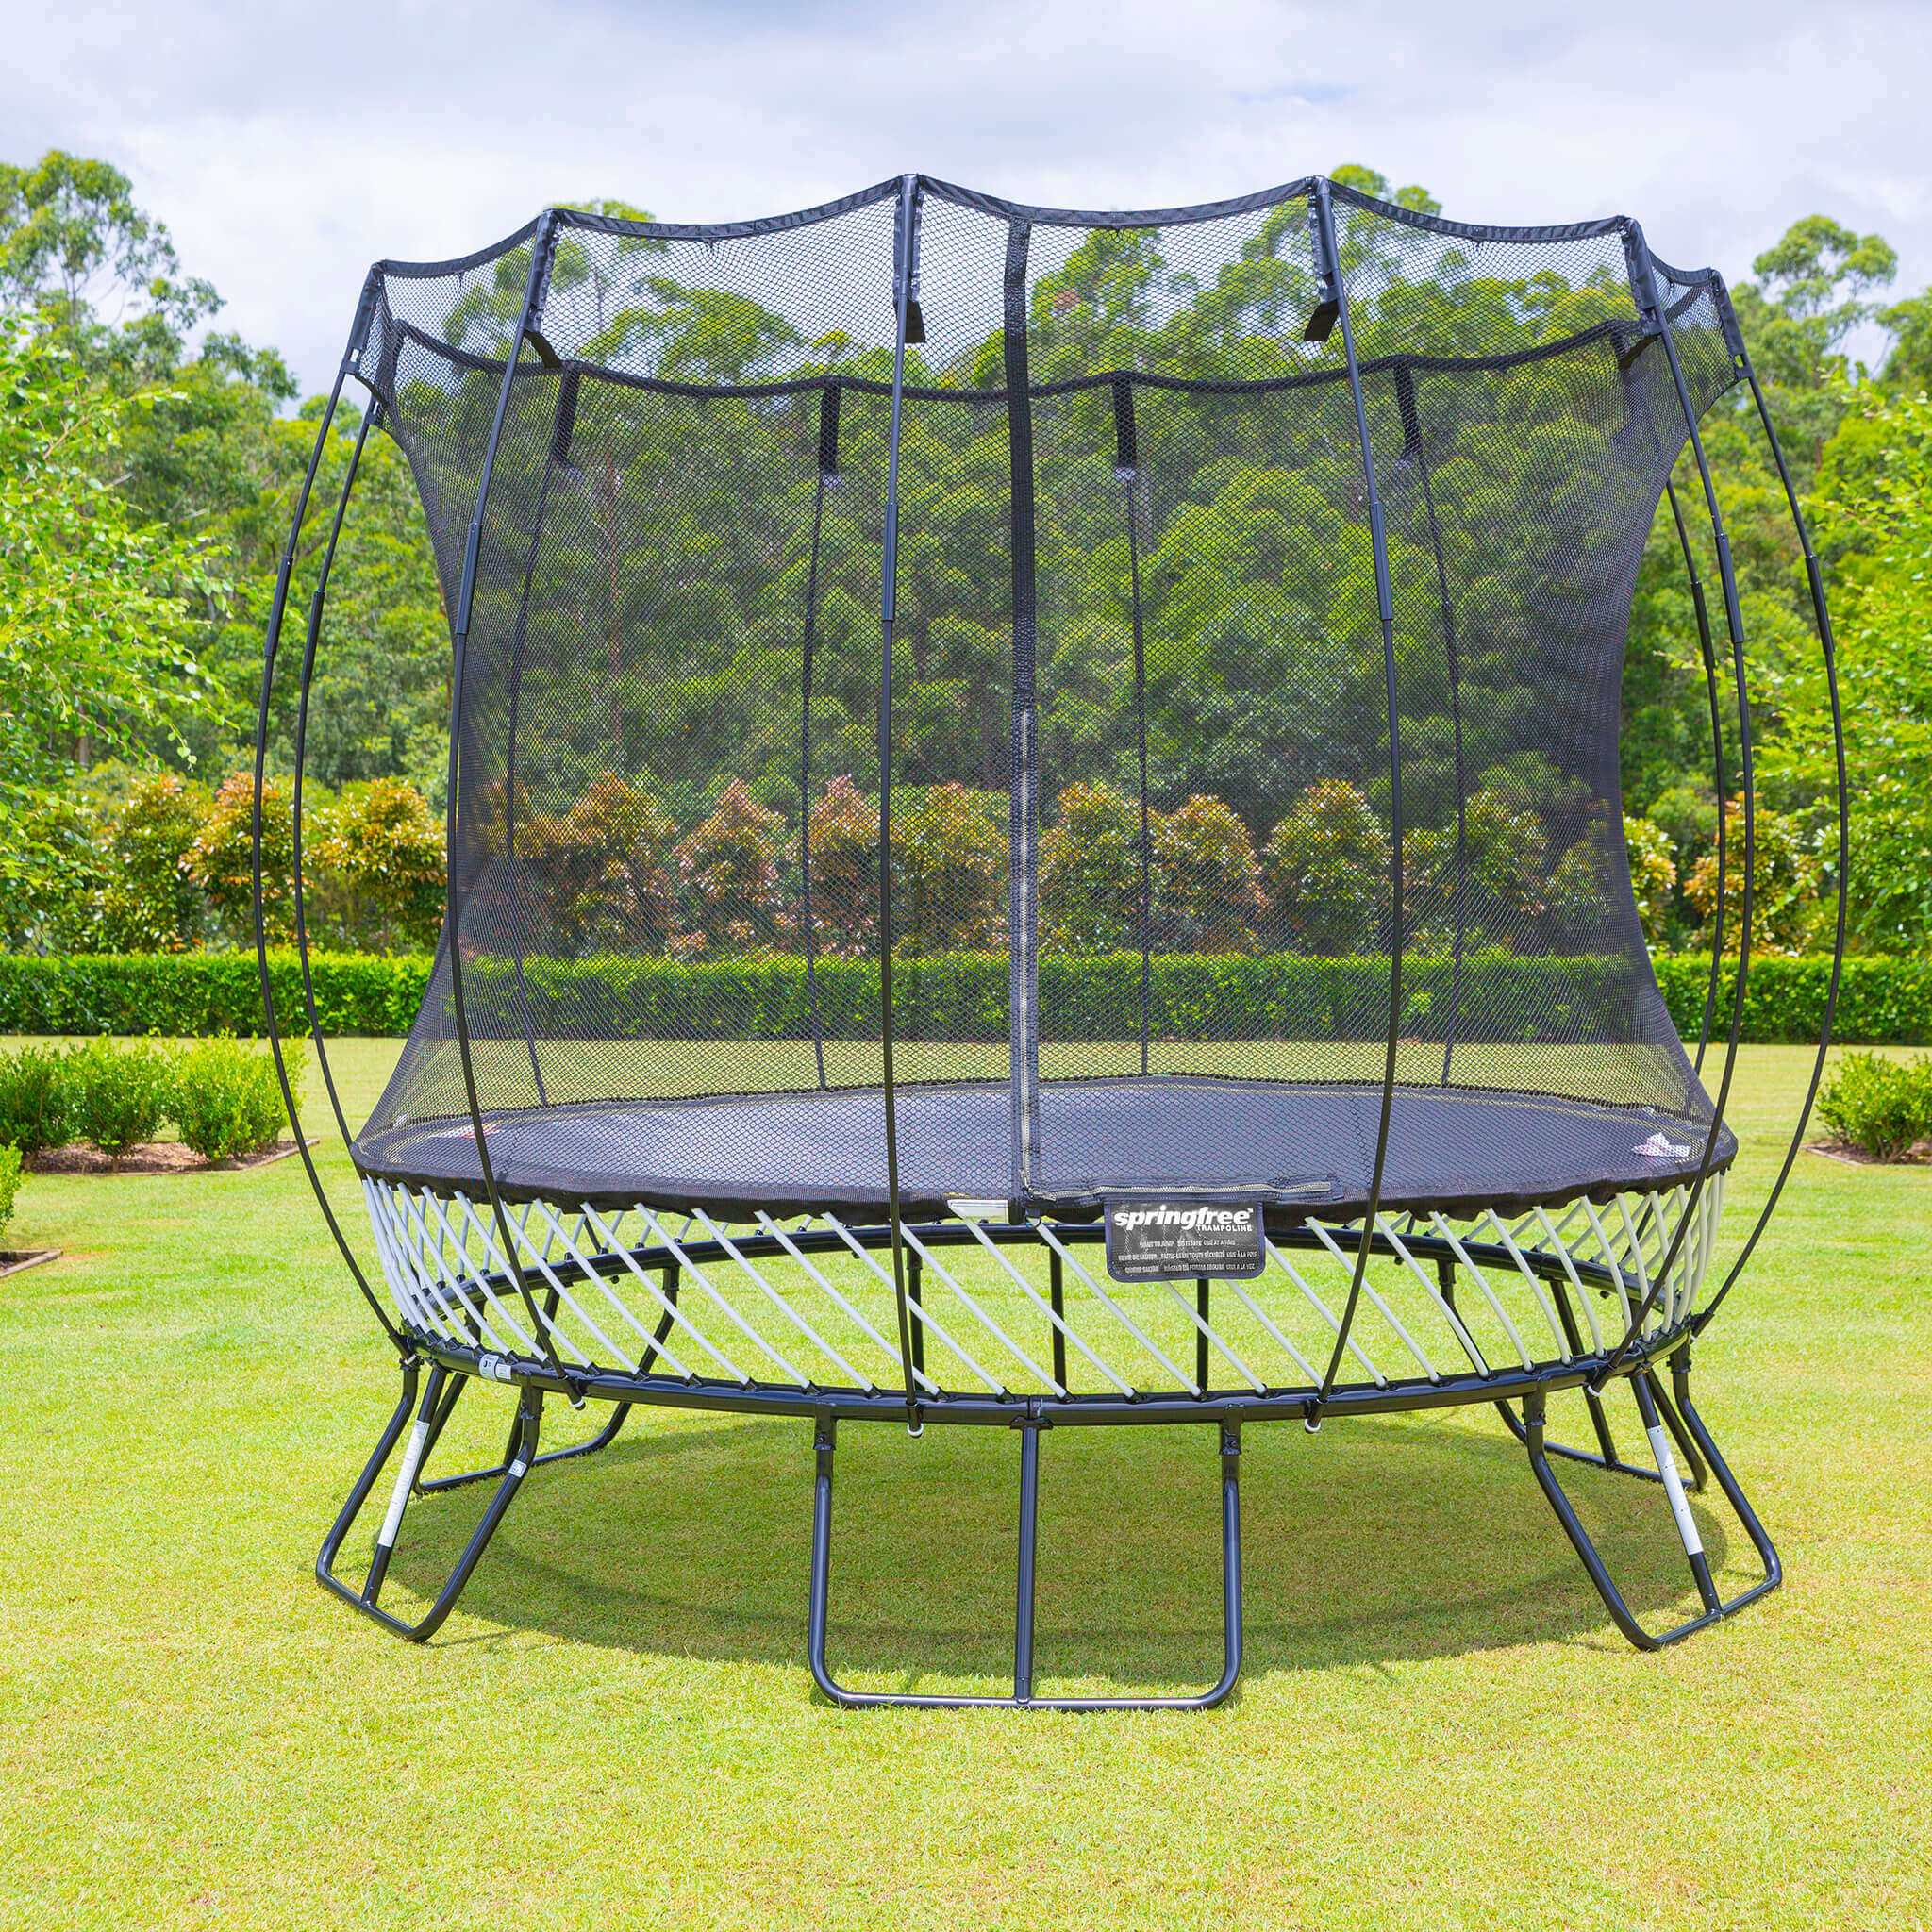 A Springfree Compact Round Trampoline.